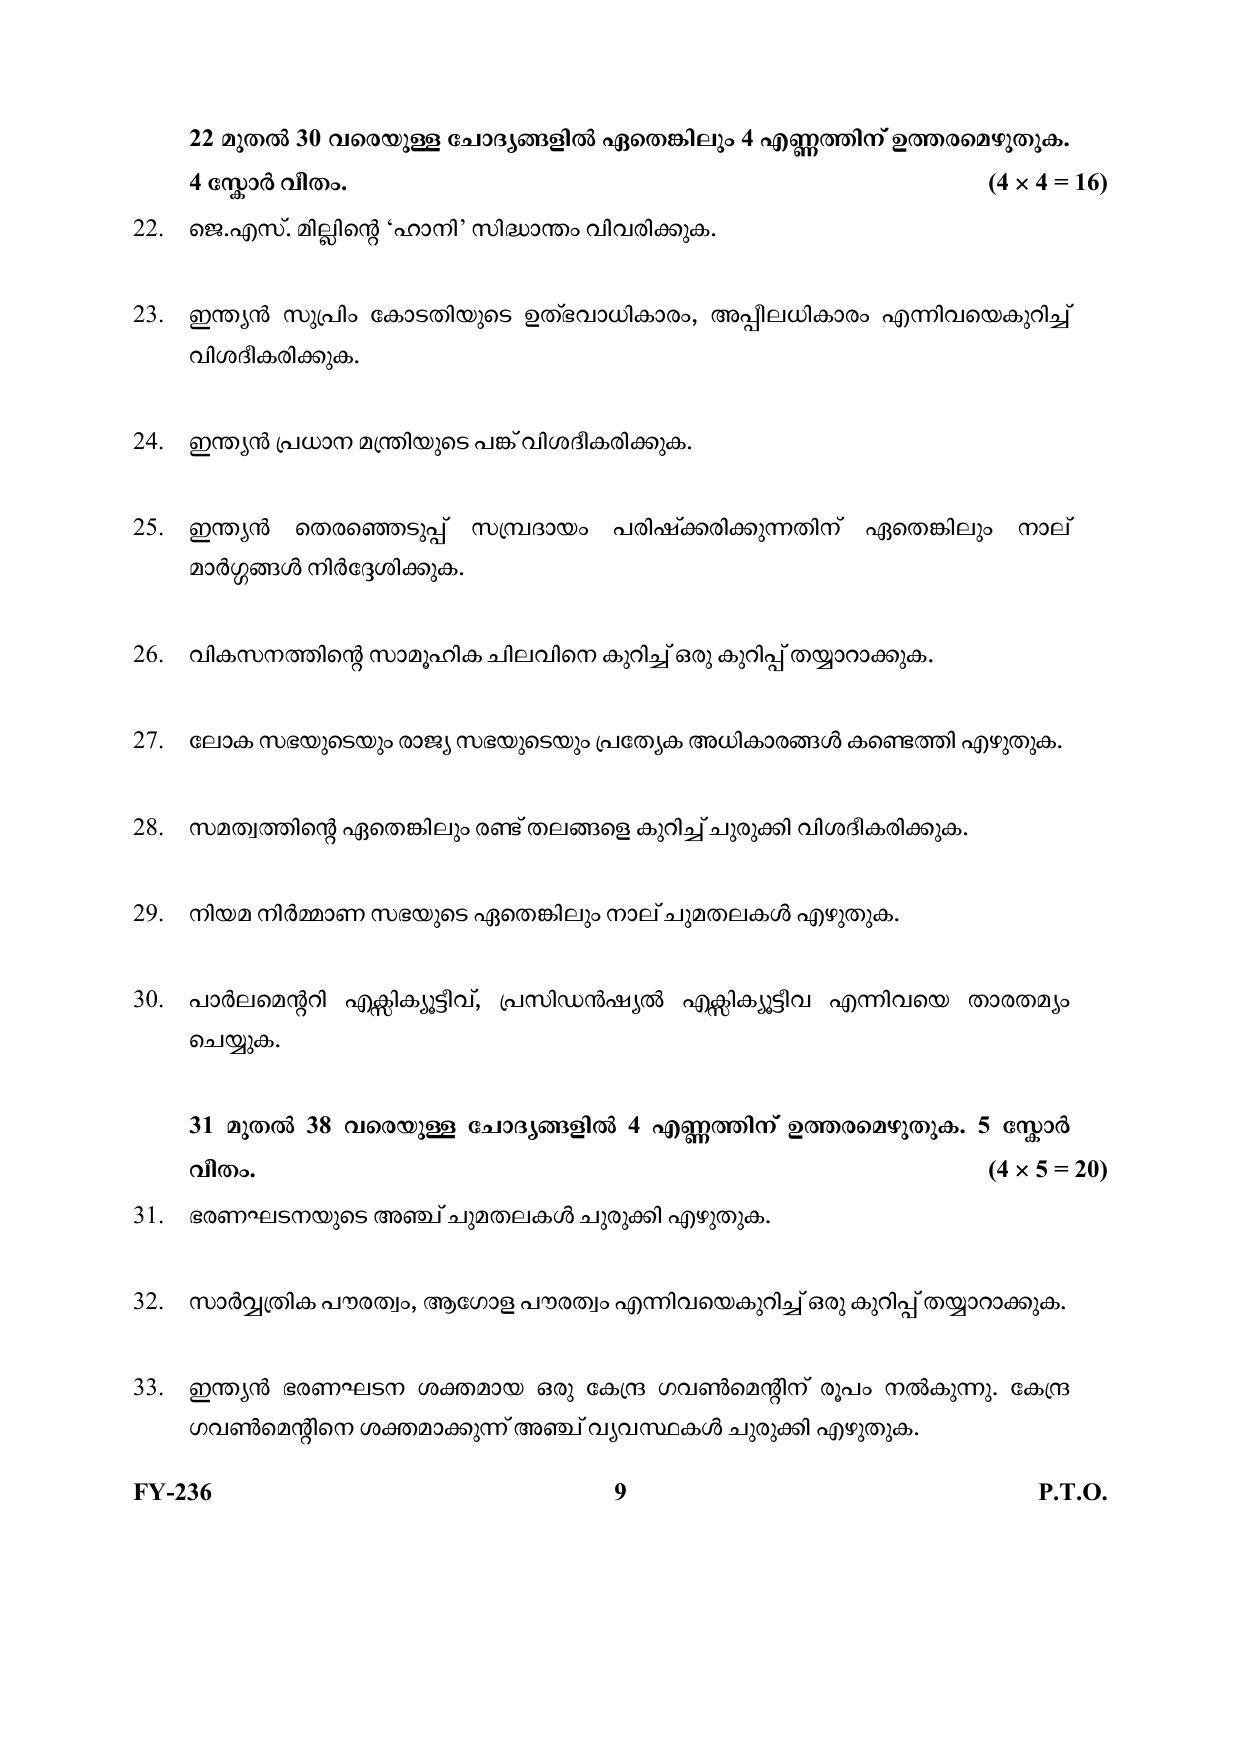 Kerala Plus One (Class 11th) Political Science Question Paper 2021 - Page 9